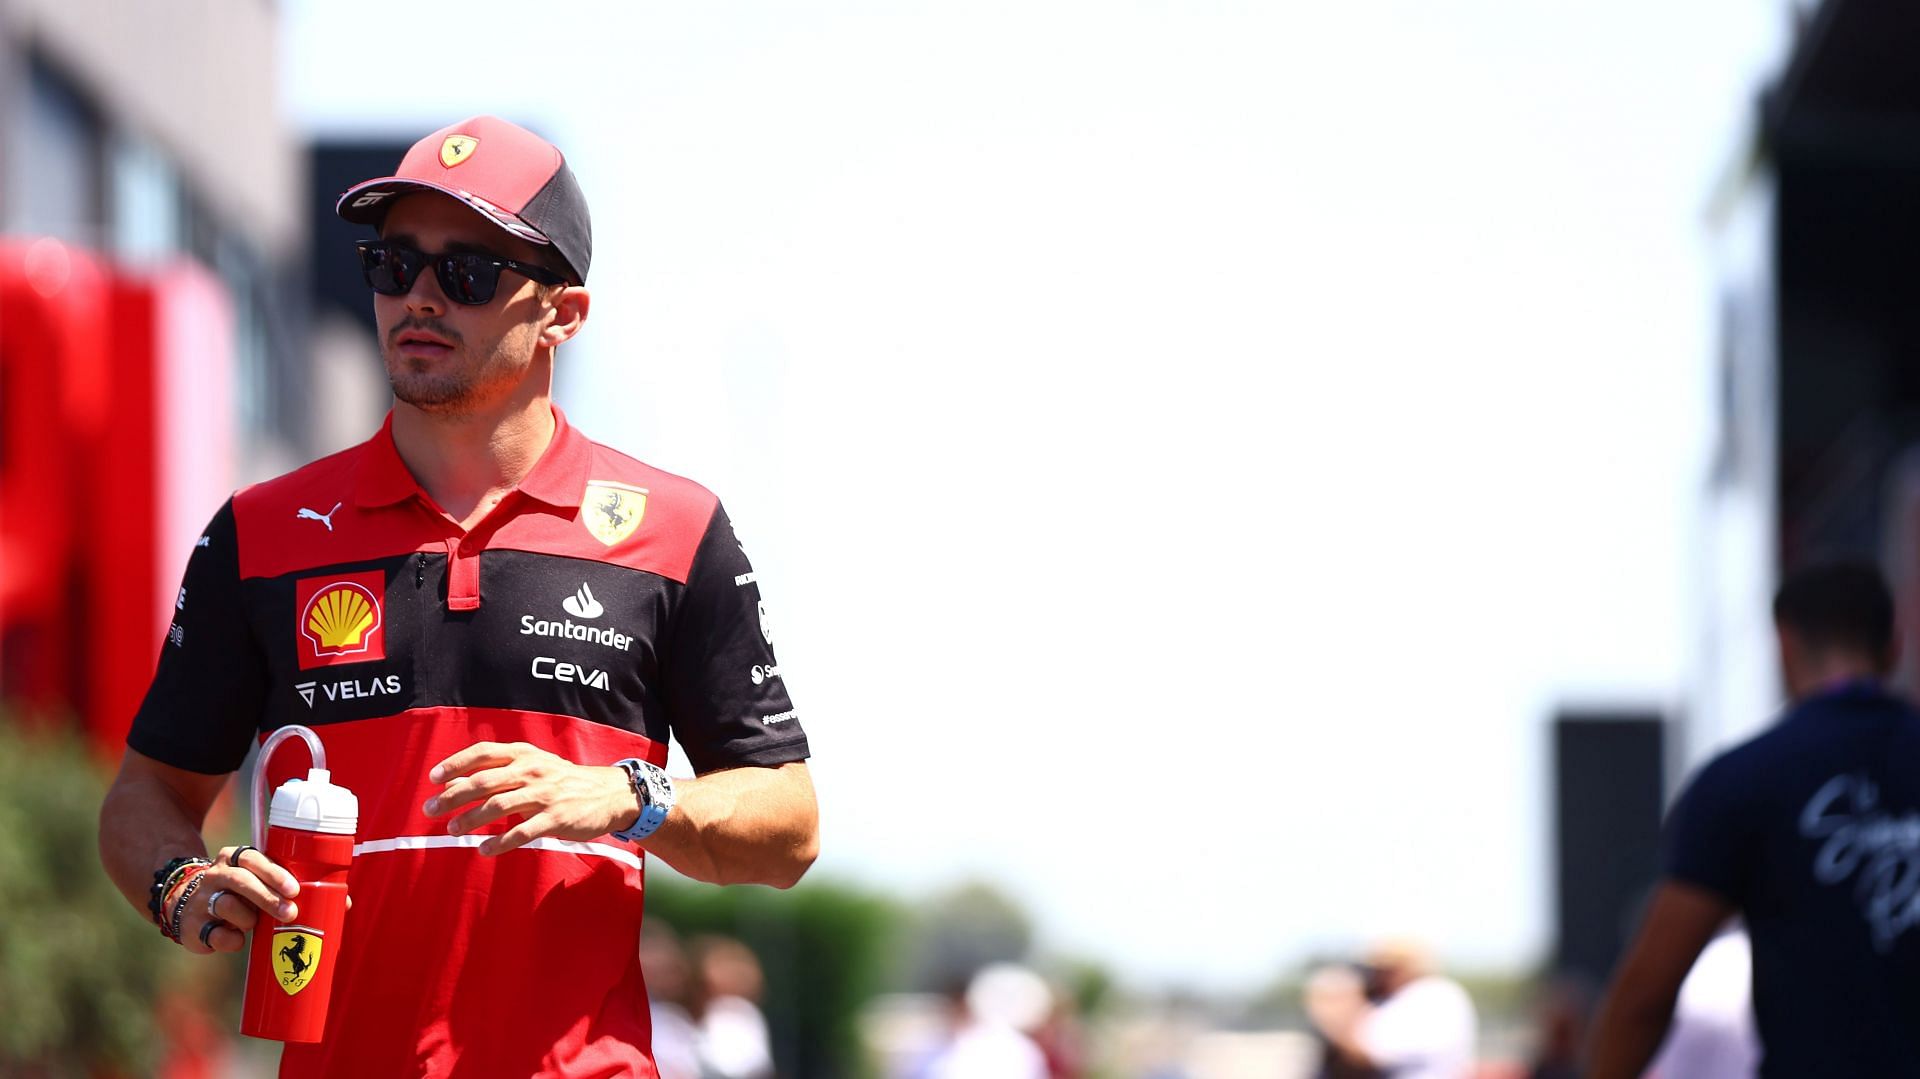 Charles Leclerc walks in the paddock during previews ahead of the F1 Grand Prix of France at Circuit Paul Ricard on July 21, 2022, in Le Castellet, France (Photo by Mark Thompson/Getty Images)